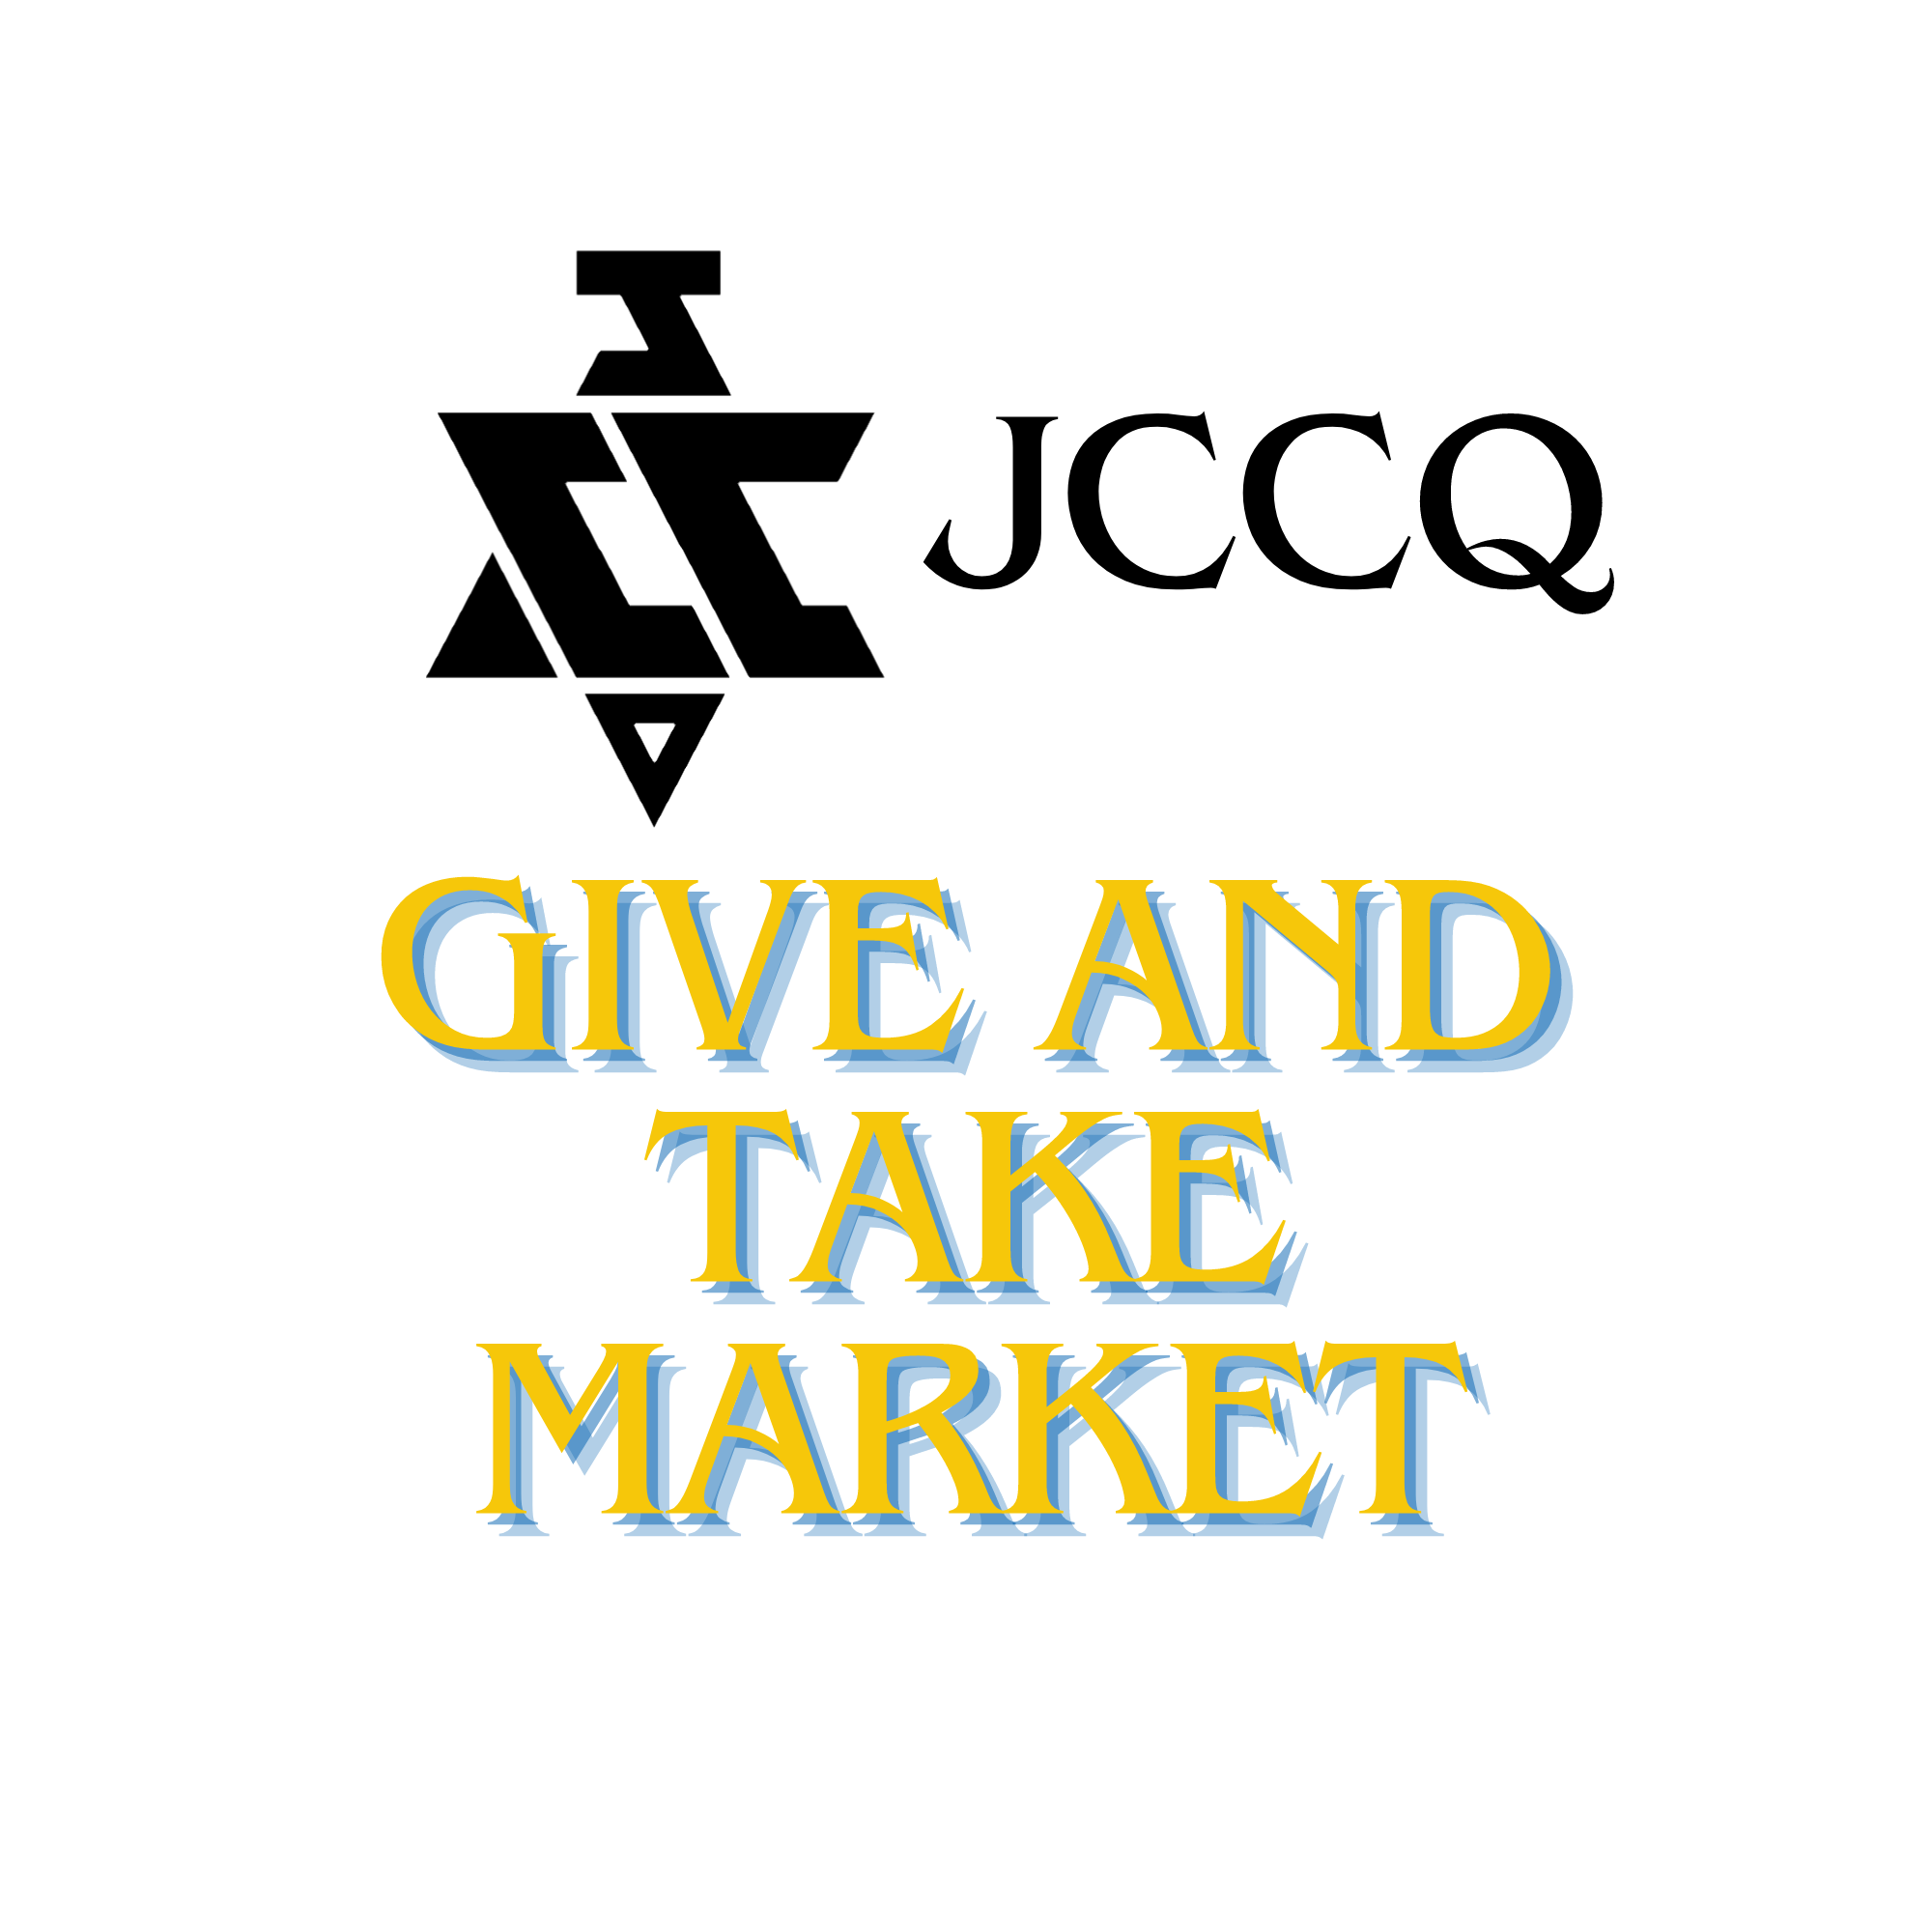 Give and Take Market